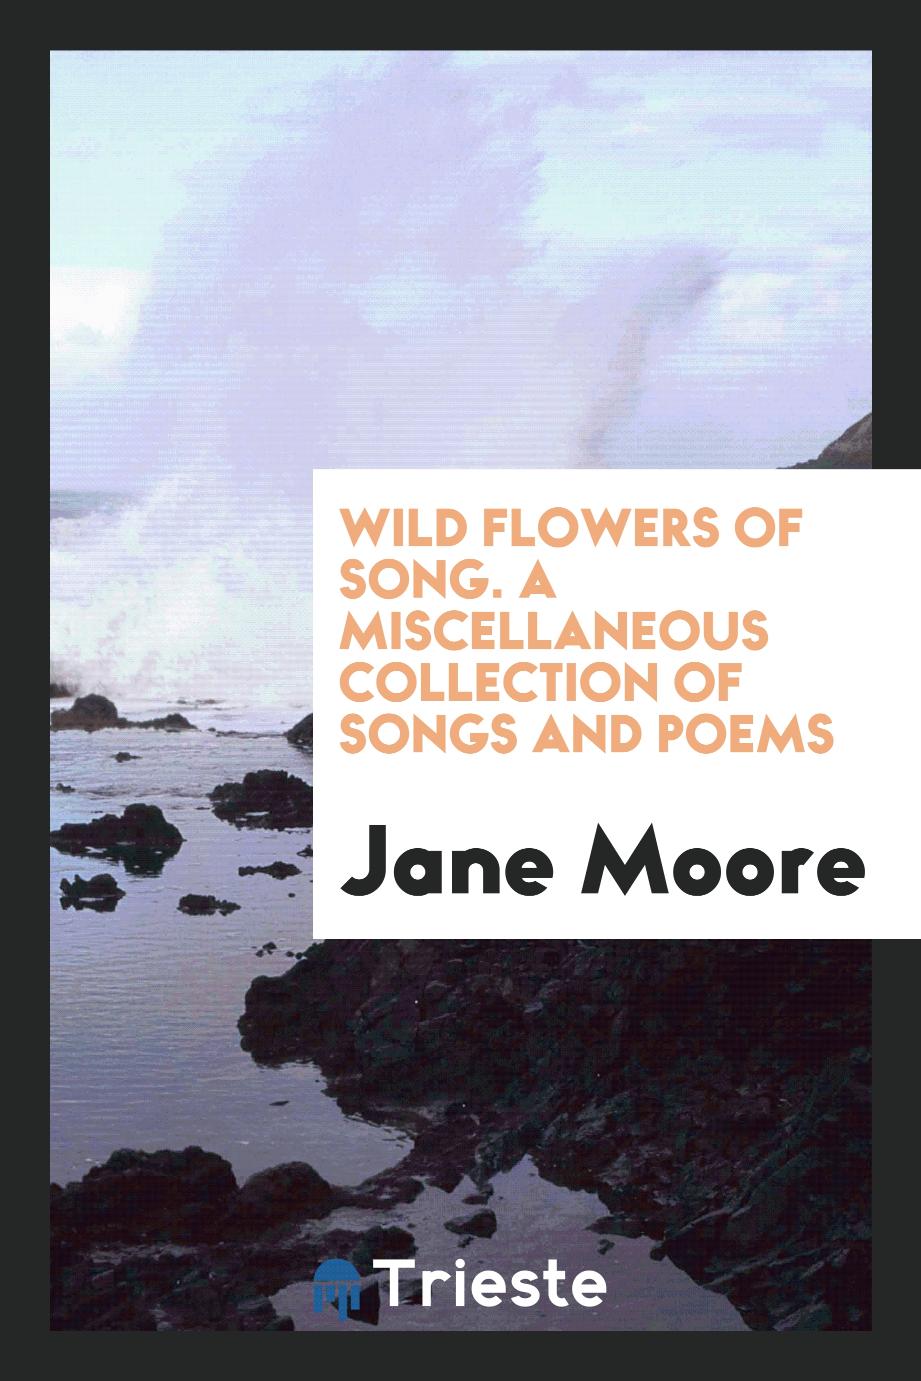 Wild Flowers of Song. A Miscellaneous Collection of Songs and Poems